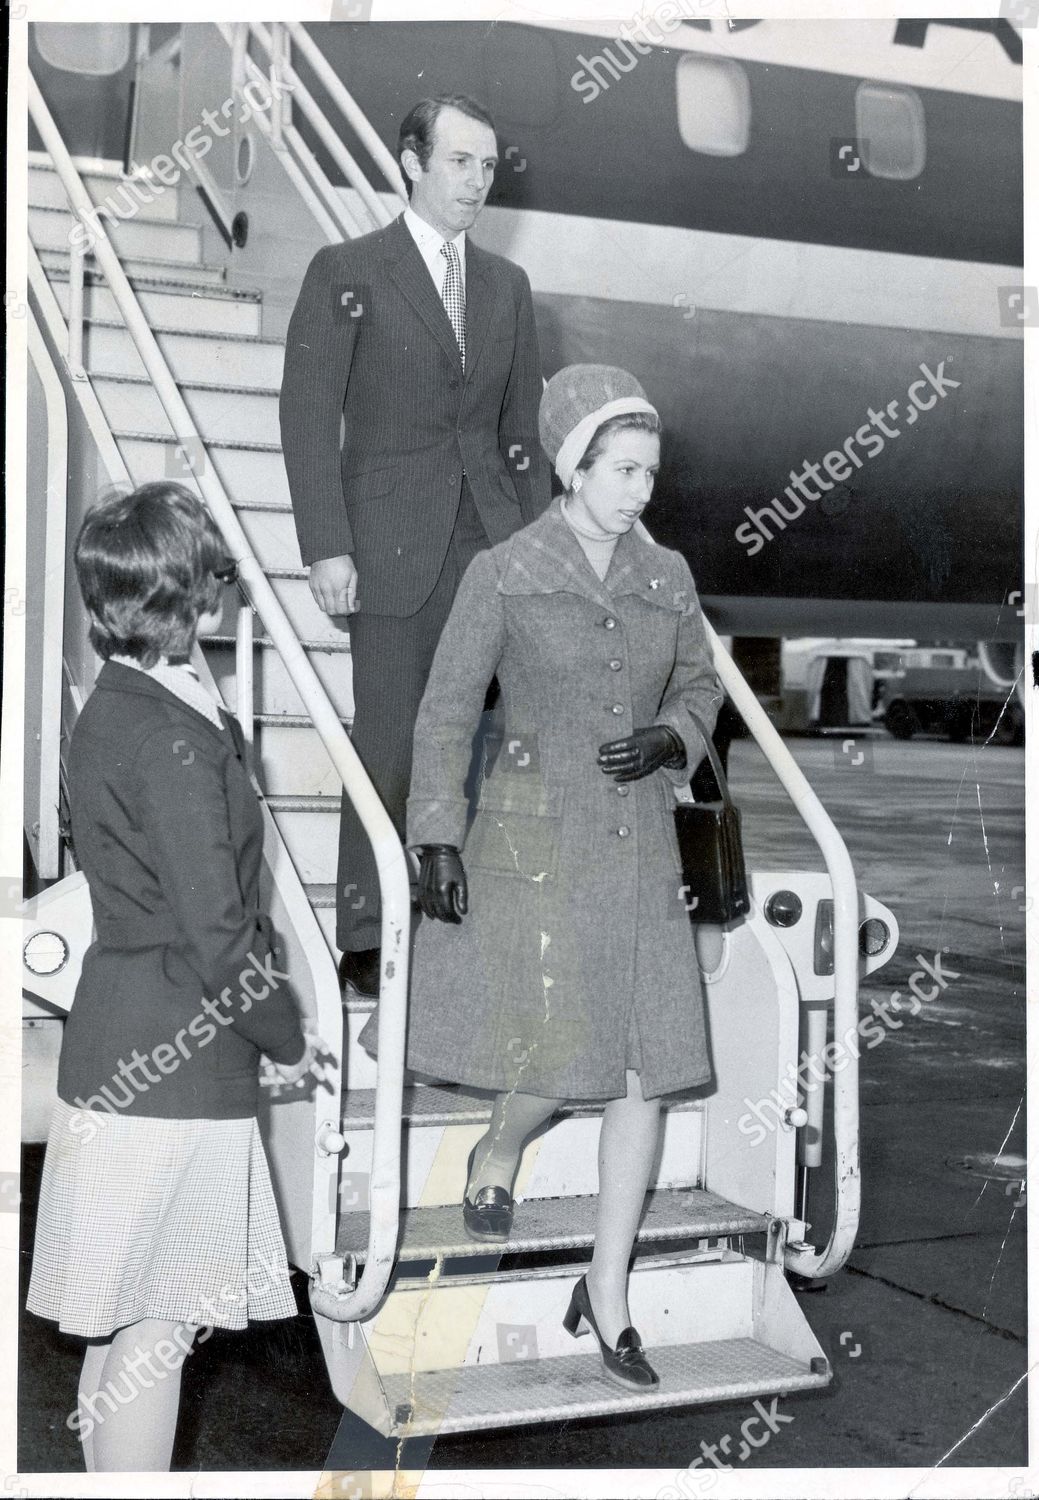 princess-anne-now-princess-royal-and-captain-mark-phillips-november-1974-princess-anne-and-her-husband-captain-mark-phillips-on-their-arrival-at-londons-heathrow-airport-this-morning-from-canada-during-their-short-visit-the-royal-couple-opened-the-shutterstock-editorial-895496a.jpg